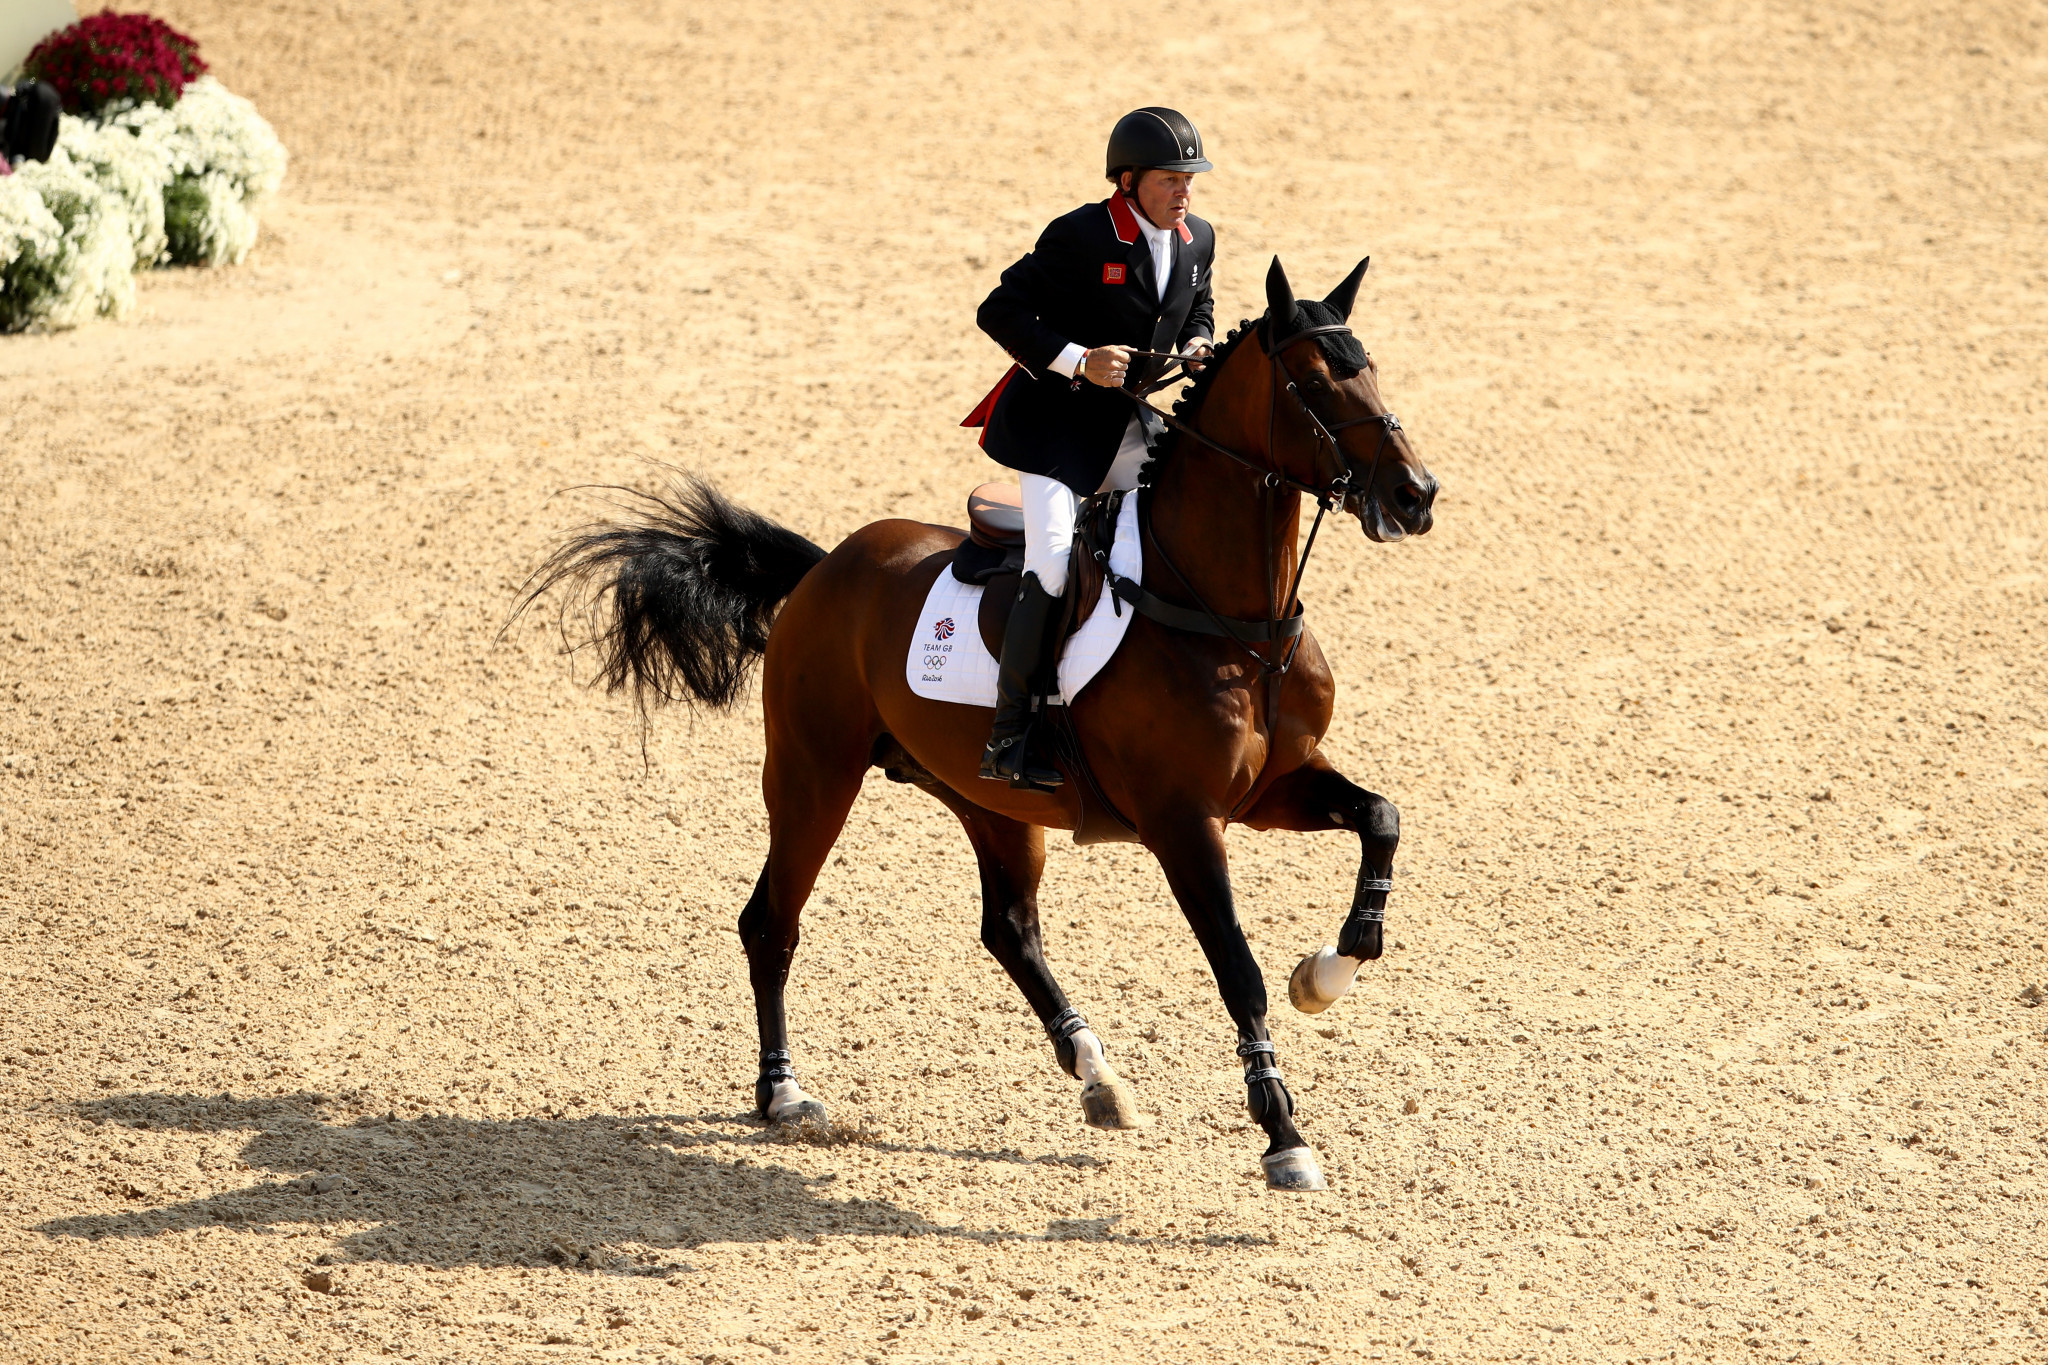 Matt Williams will aim to tell the stories in British equestrian ©Getty Images